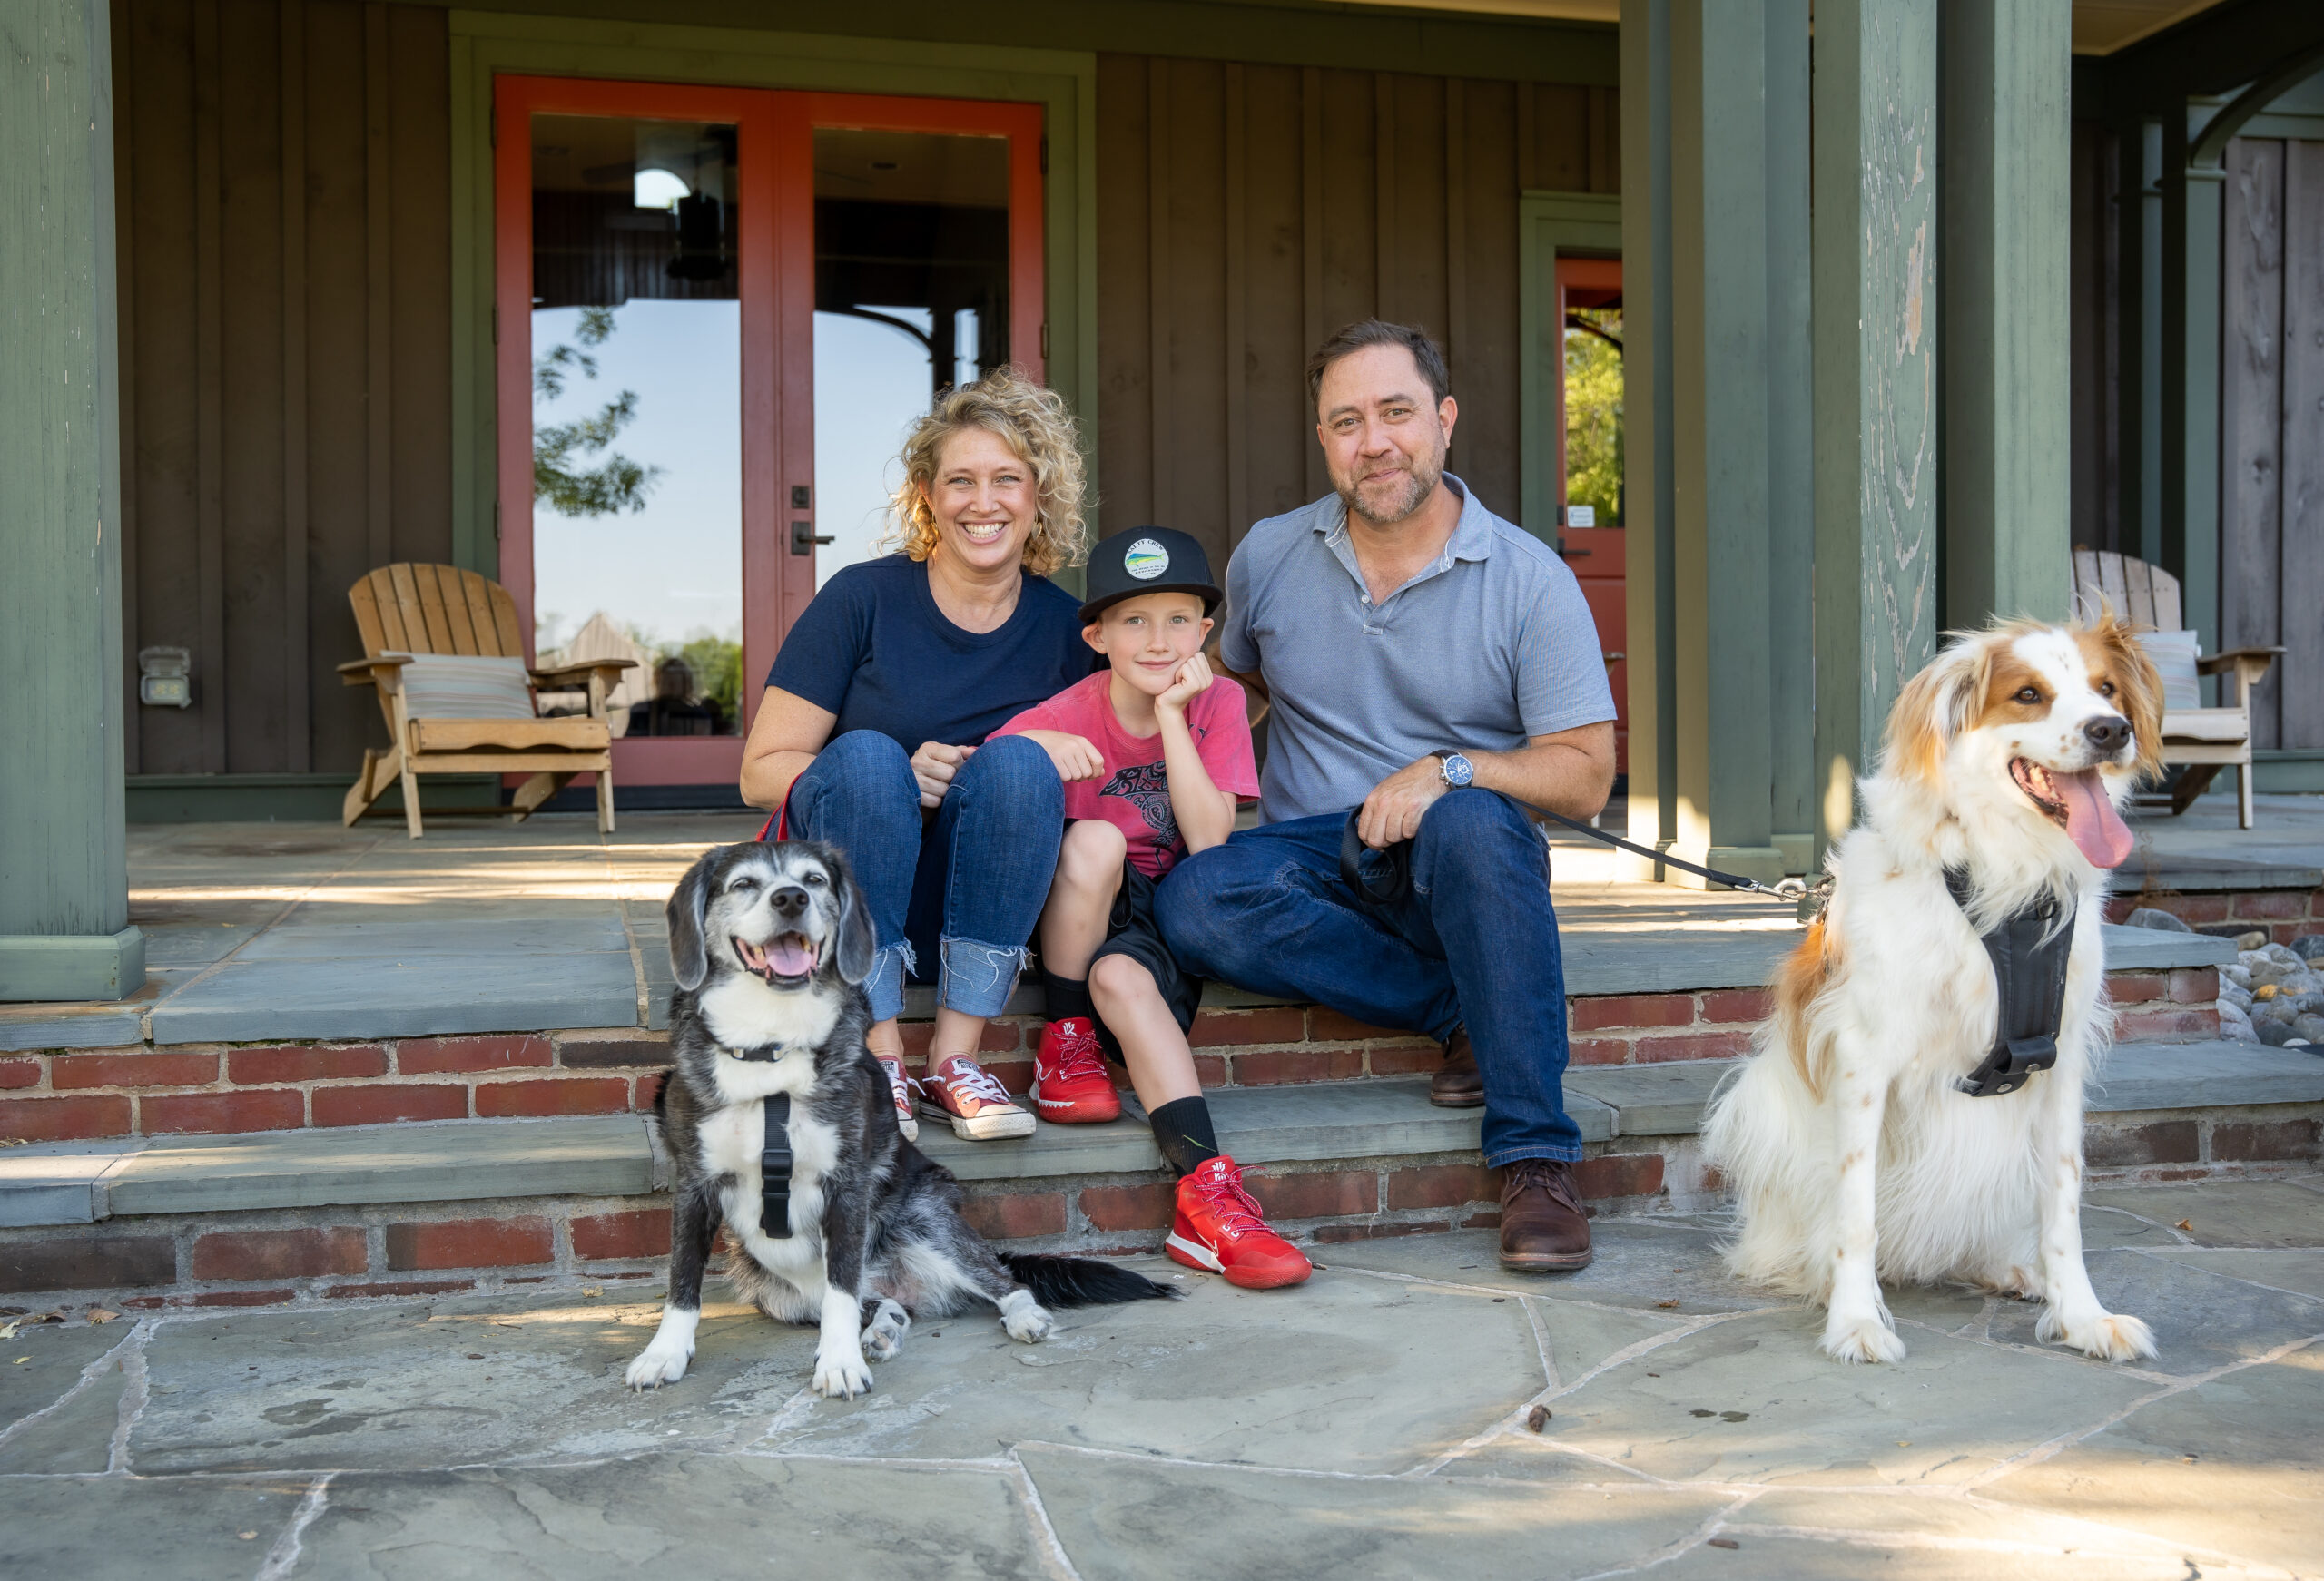 personal branding photo for realtors showing a mother and father, both realtors, and young son with their 2 dogs on steps outside a community center